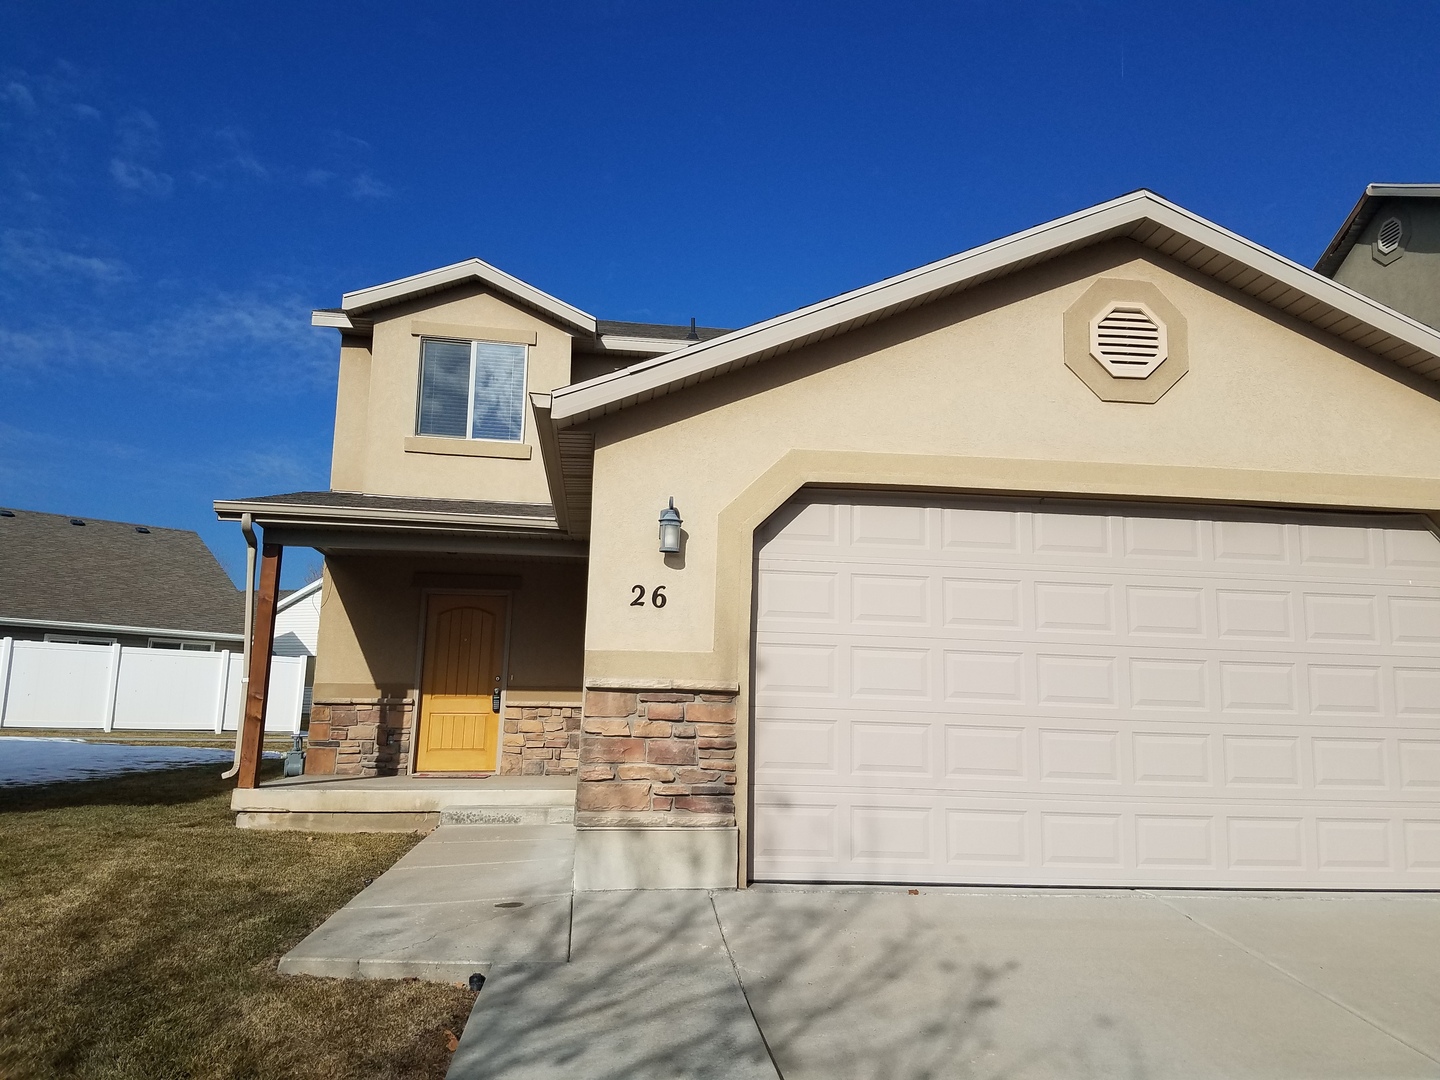 3 Bed 2.5 Bath Townhome for Rent in Layton!